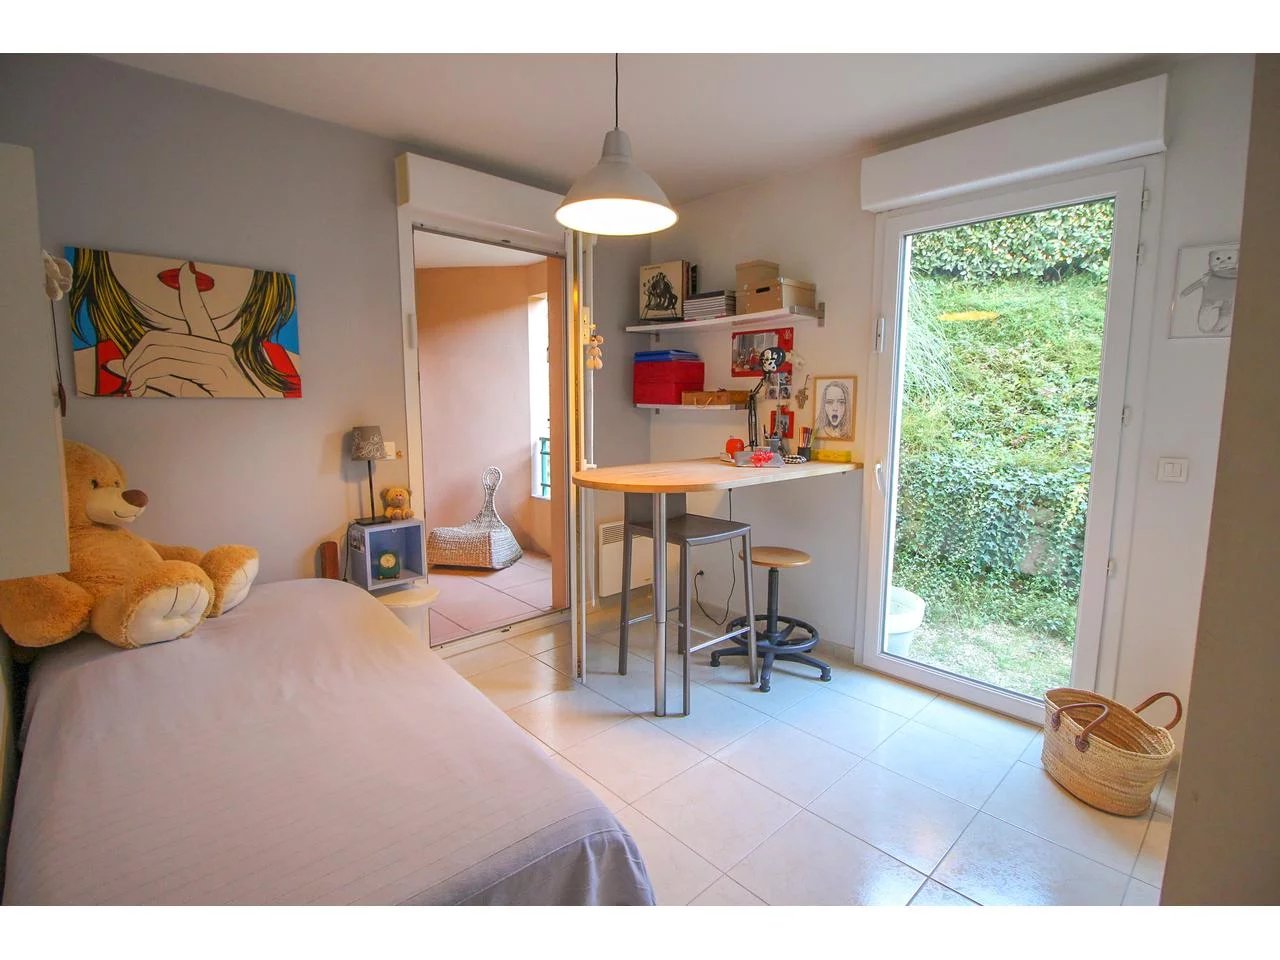 Appartement  4 Rooms 100.4m2  for sale   659 000 €